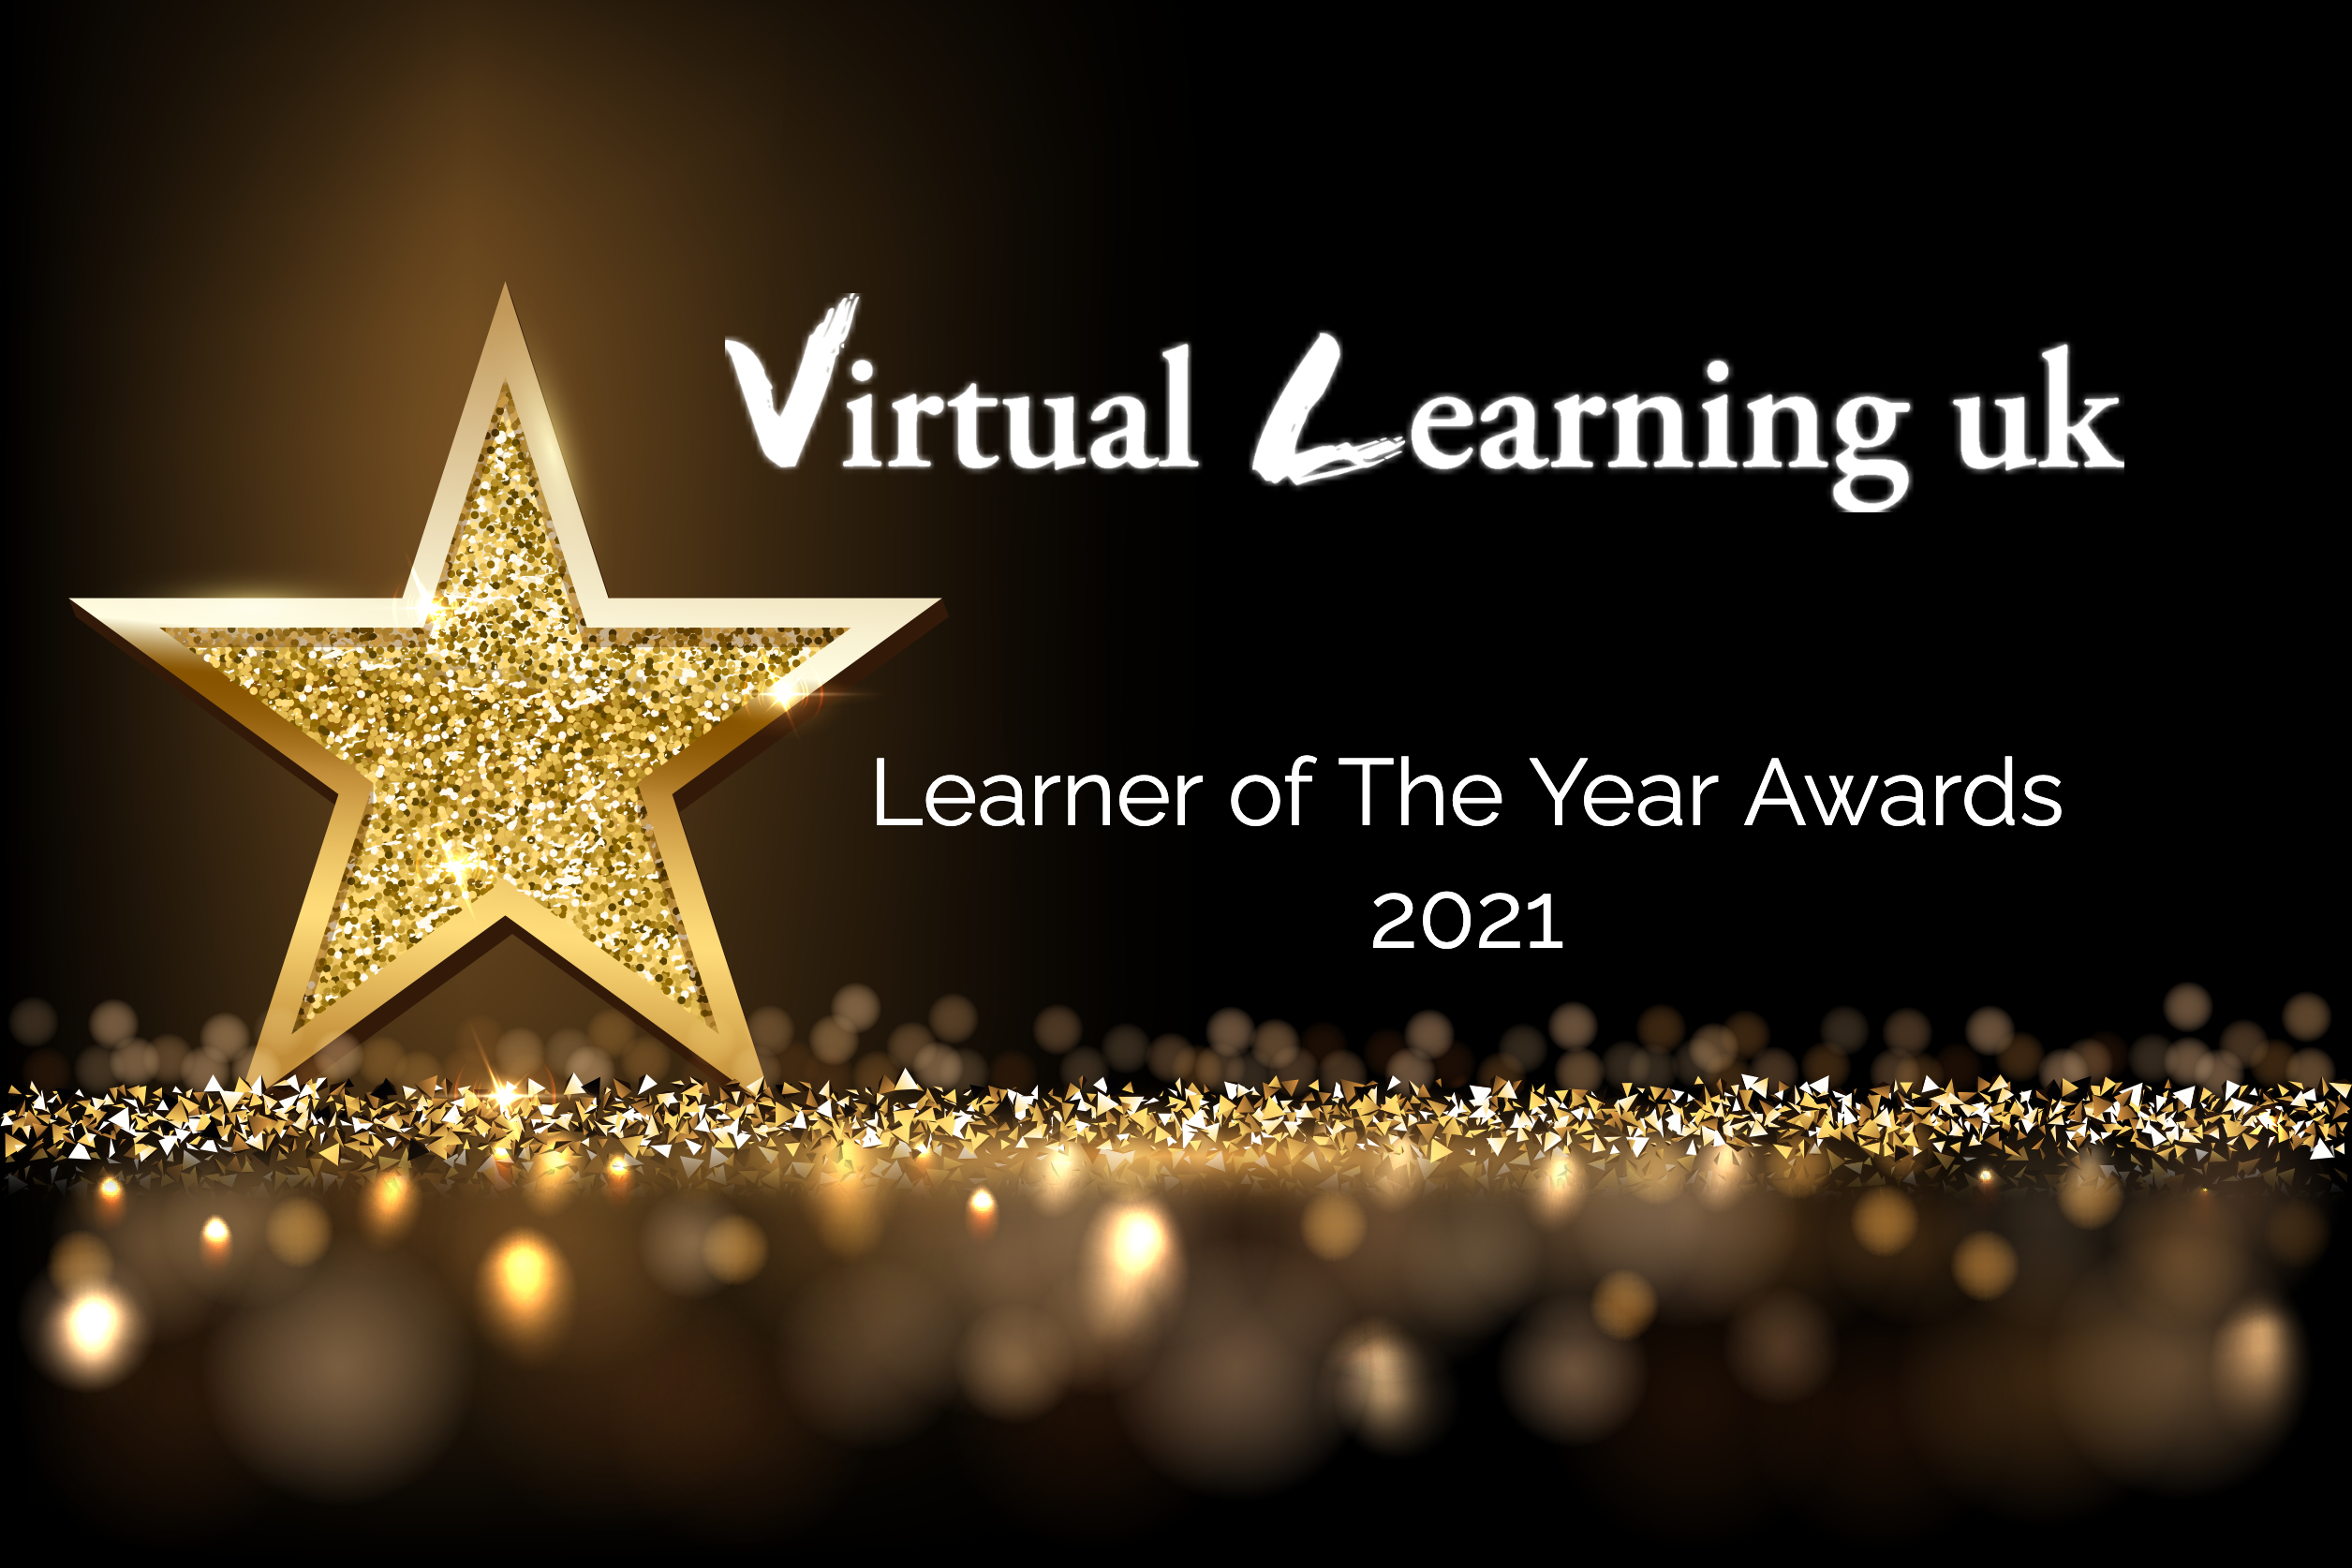 Learner of the Year Awards 2020/21